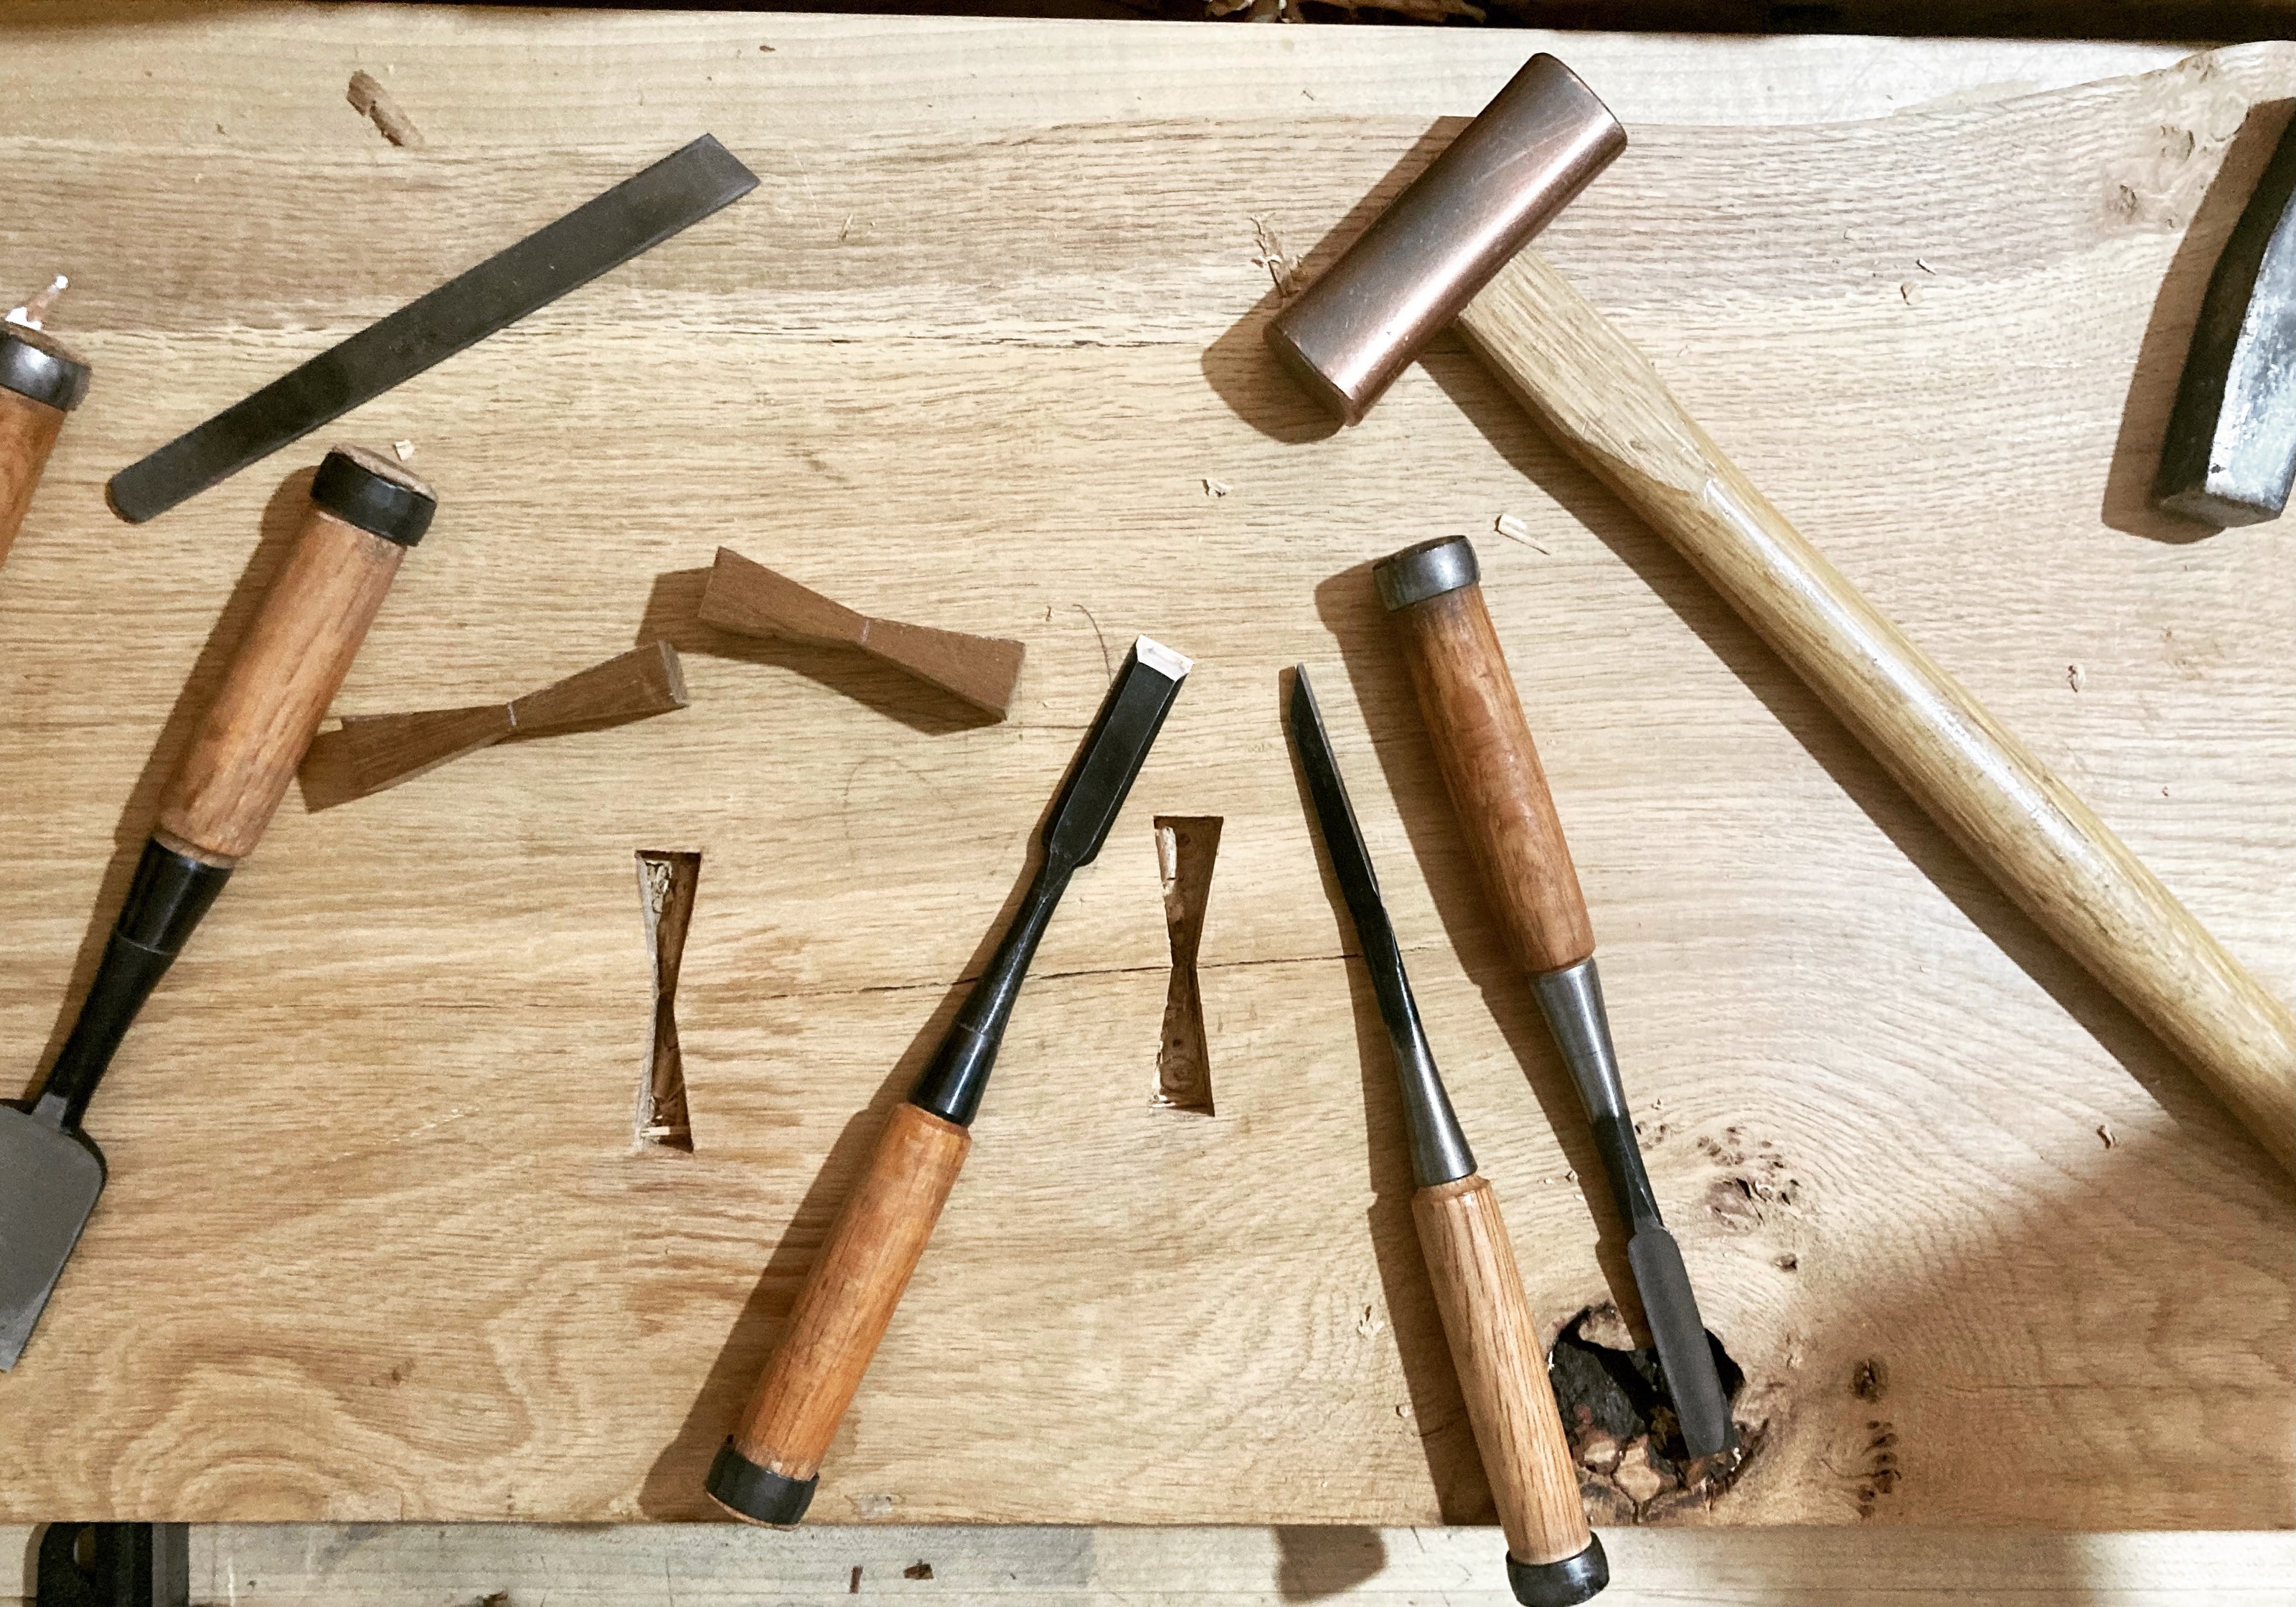 Hand tools used in my handmade furniture. Fitting butterfly inlay into a split in a live edge oak bench